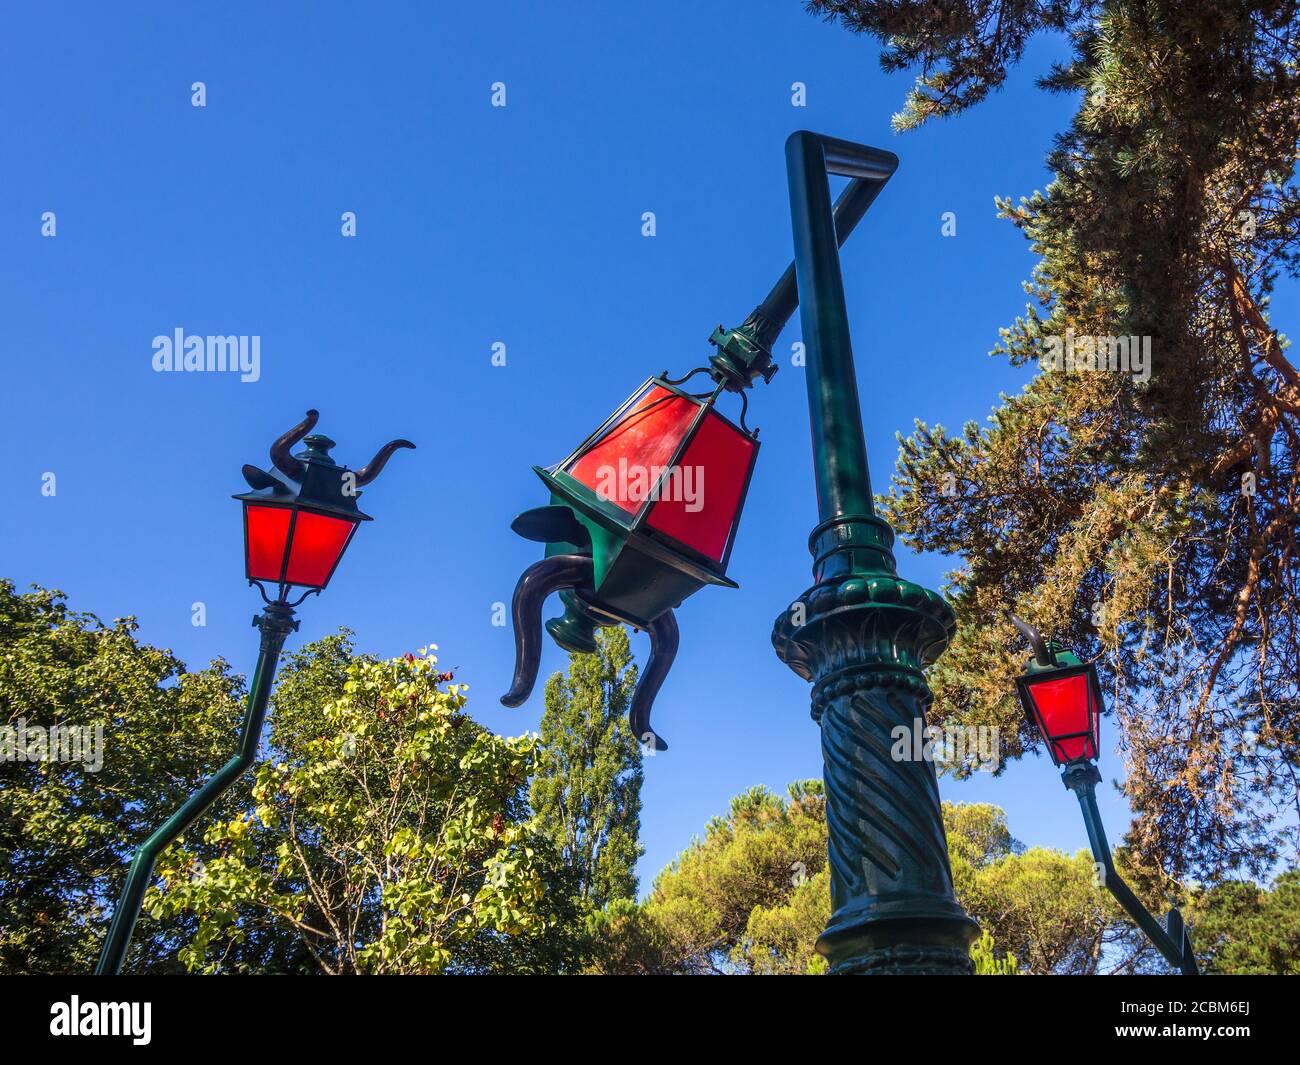 Unusual 'drunk lamp-posts' objects on the mini-golf course at the 'Camping de Nantes' campsite, Nantes Loire-Atlantique, France. Stock Photo